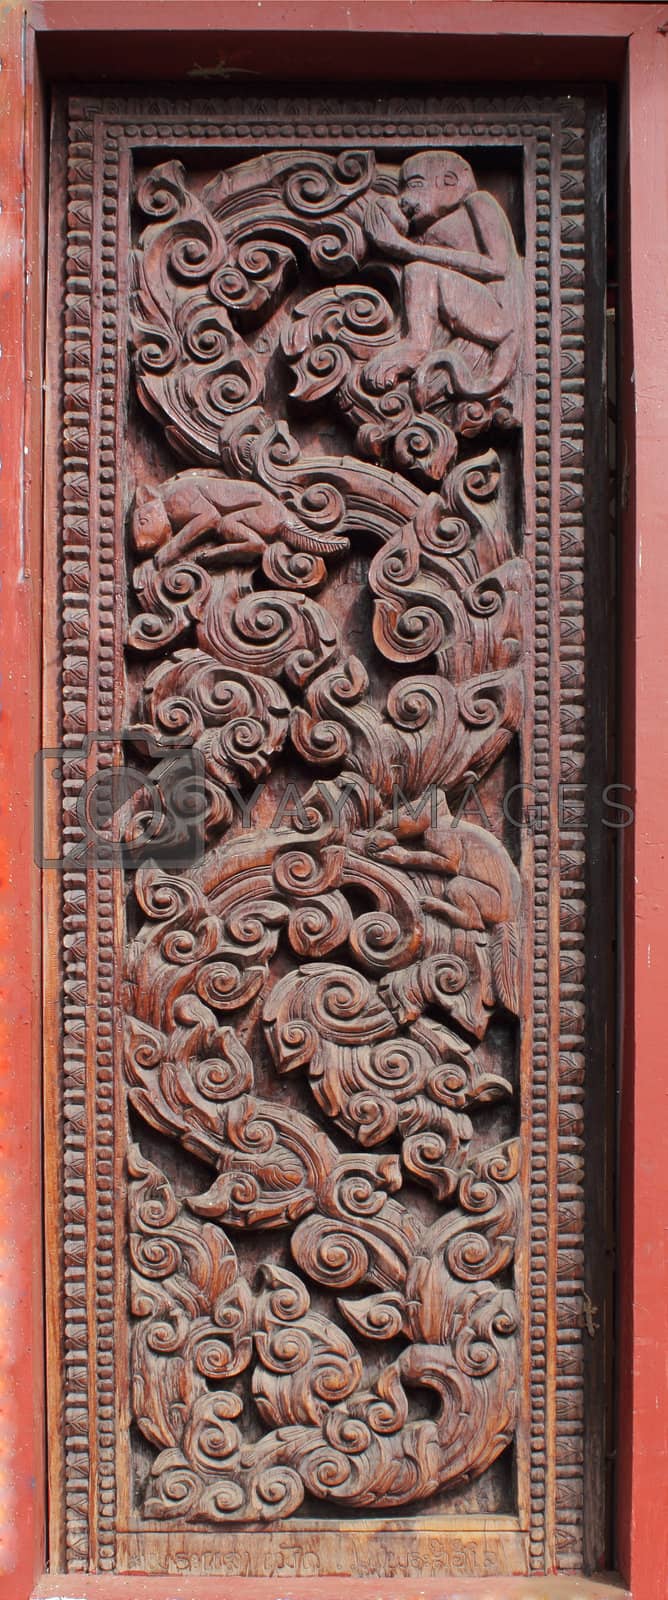 Royalty free image of Decorated wooden beside door by olovedog